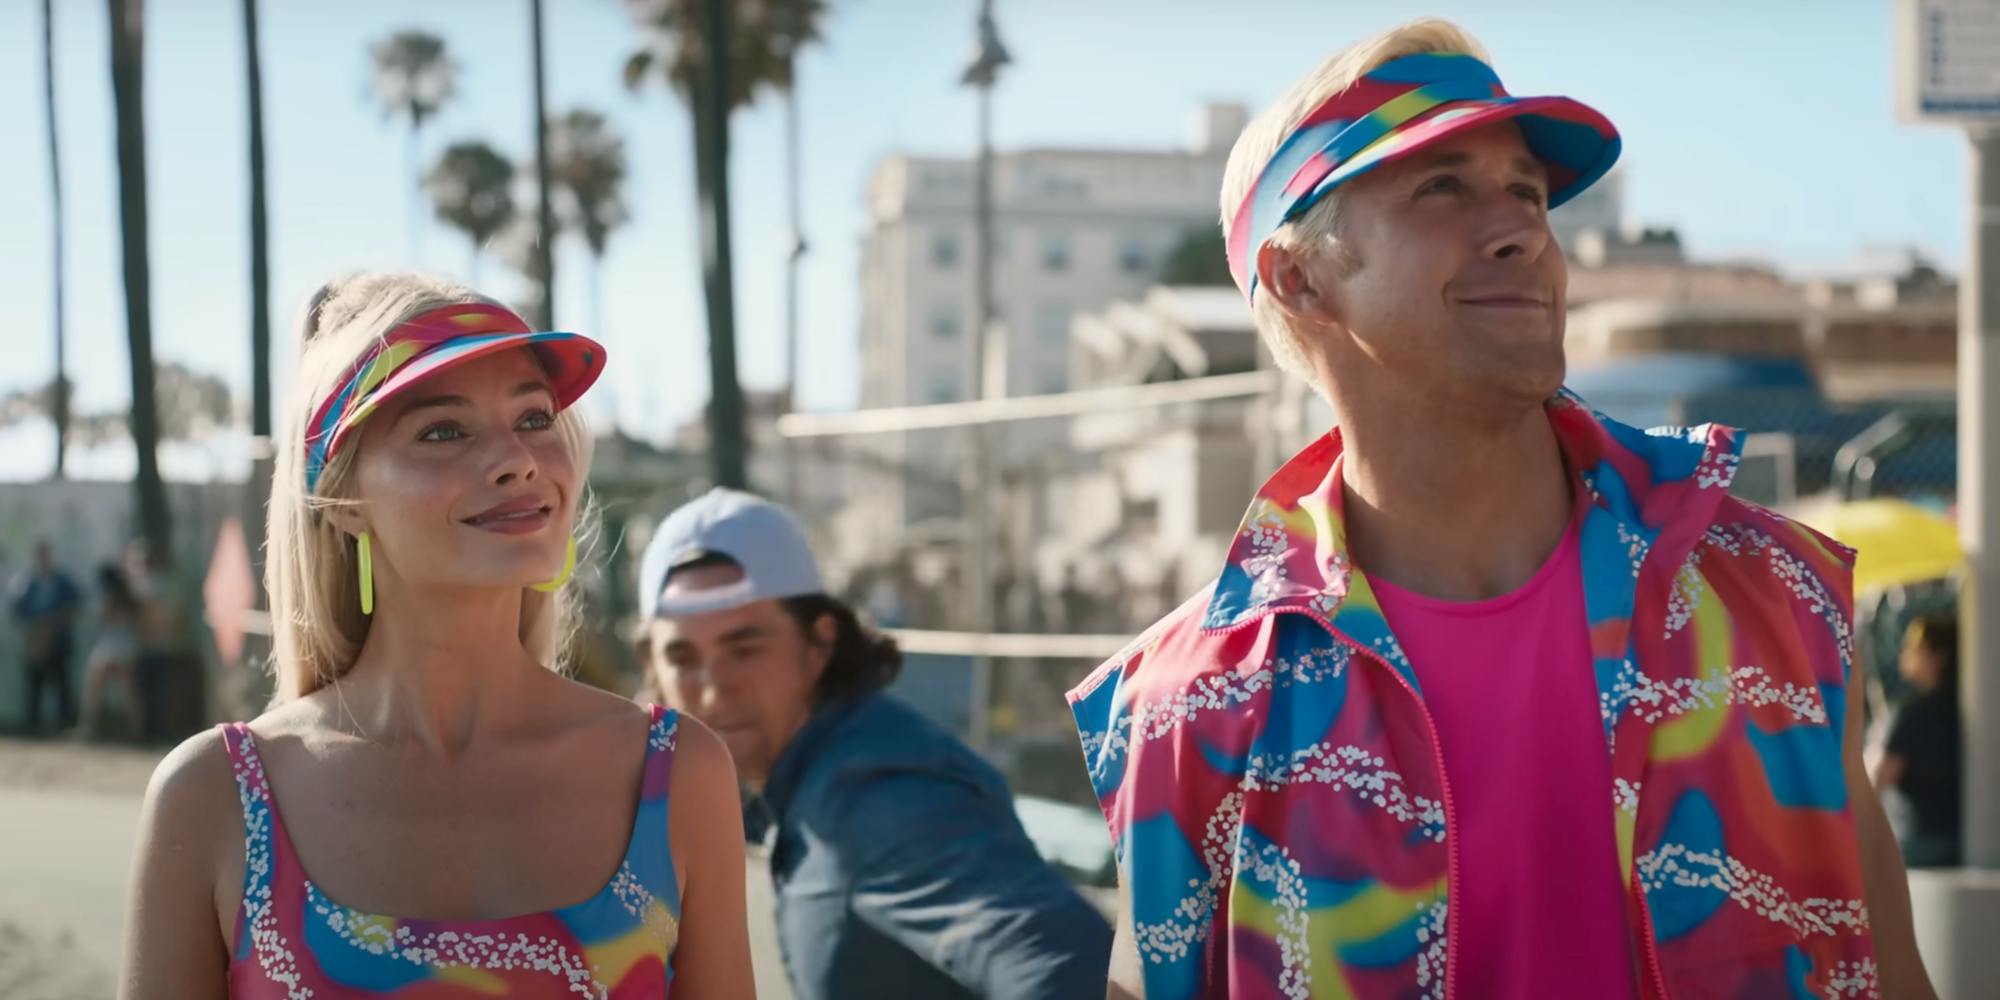 margot robbie and ryan gosling in neon rolling skating outfits, looking up and smiling in Barbie.